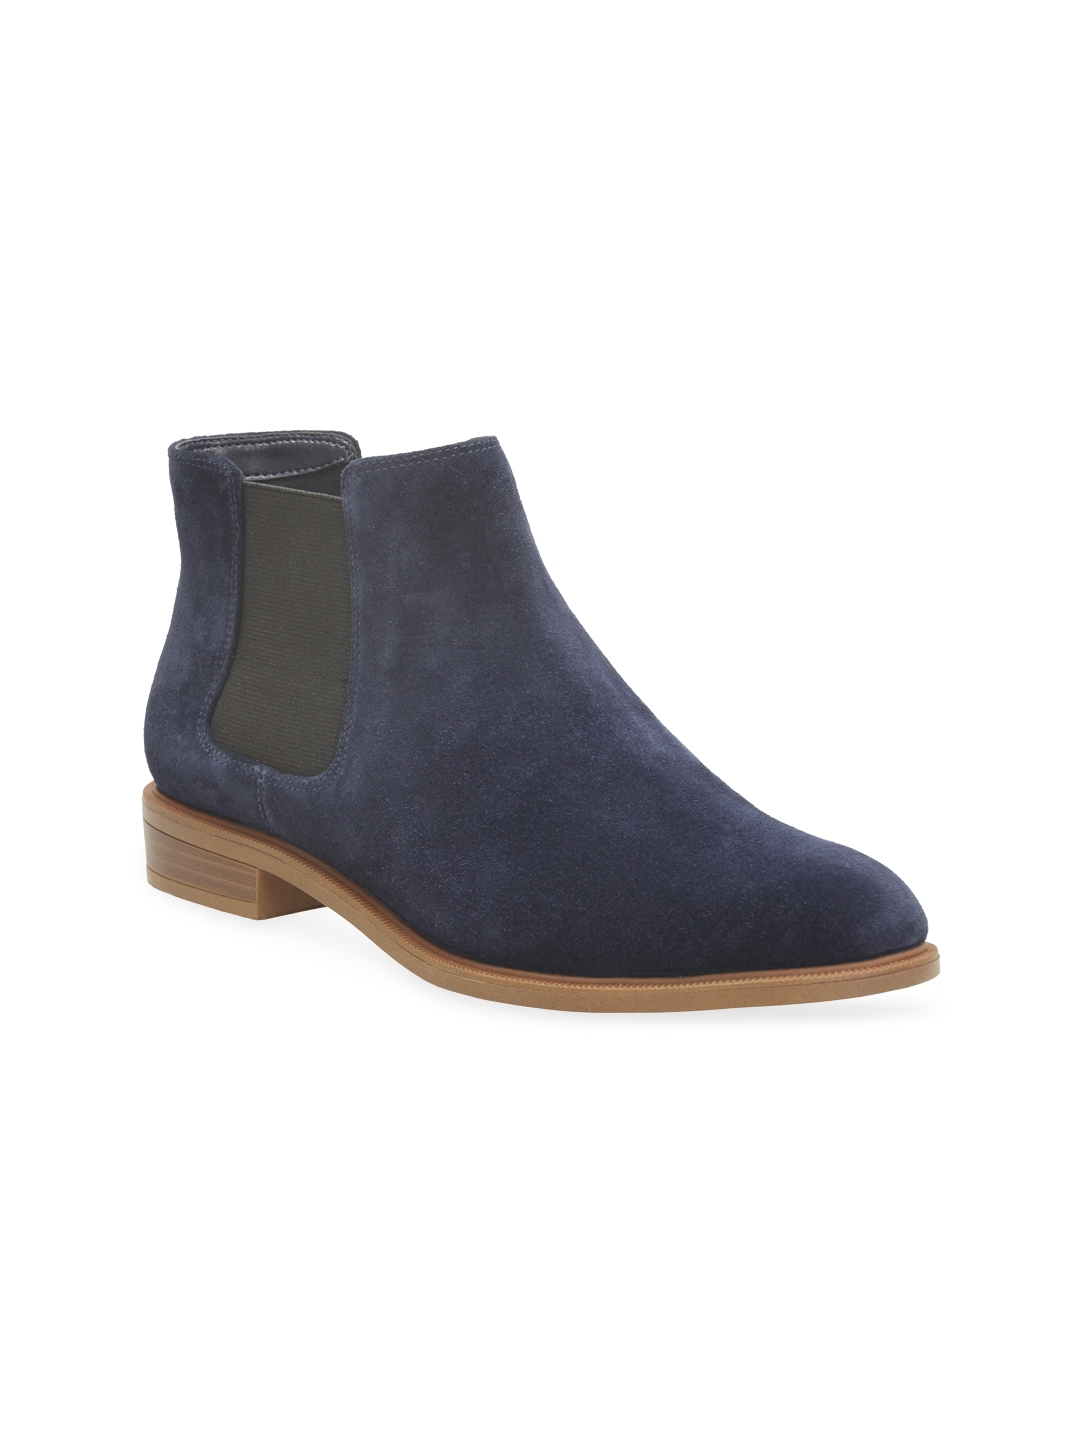 Buy Clarks Women Navy Suede Boots - Boots for Women 1474533 | Myntra